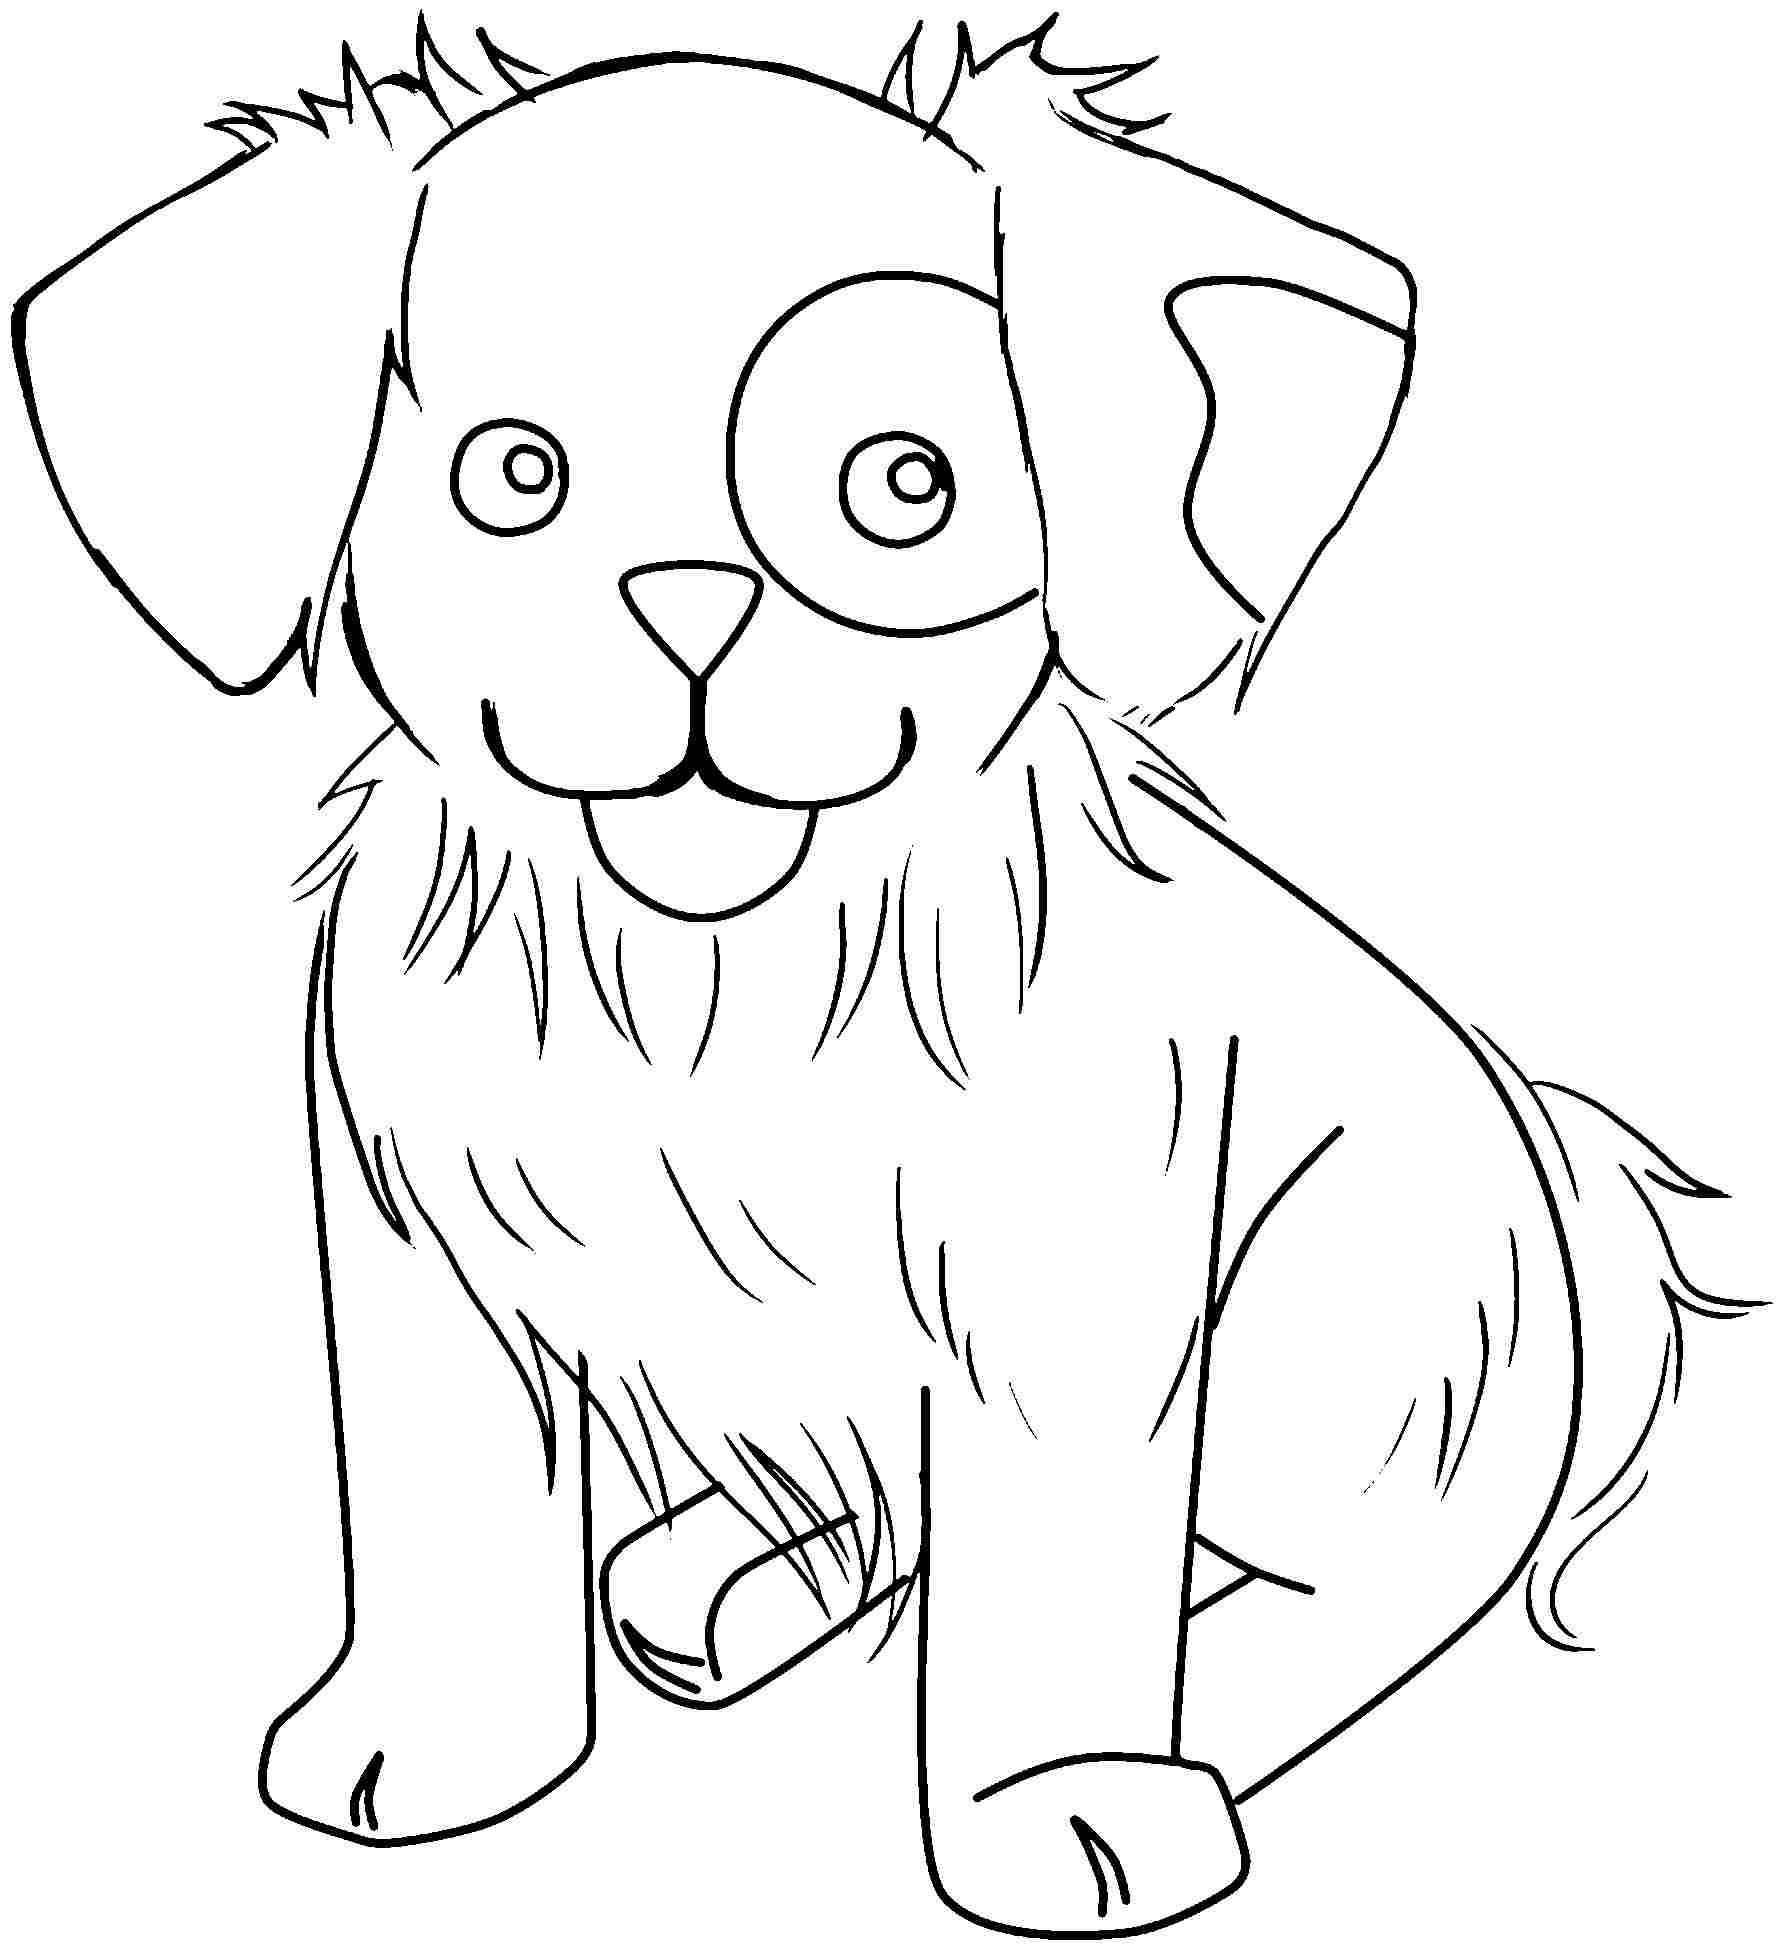 Free Printable Cute Animal Coloring Pages - Coloring Home